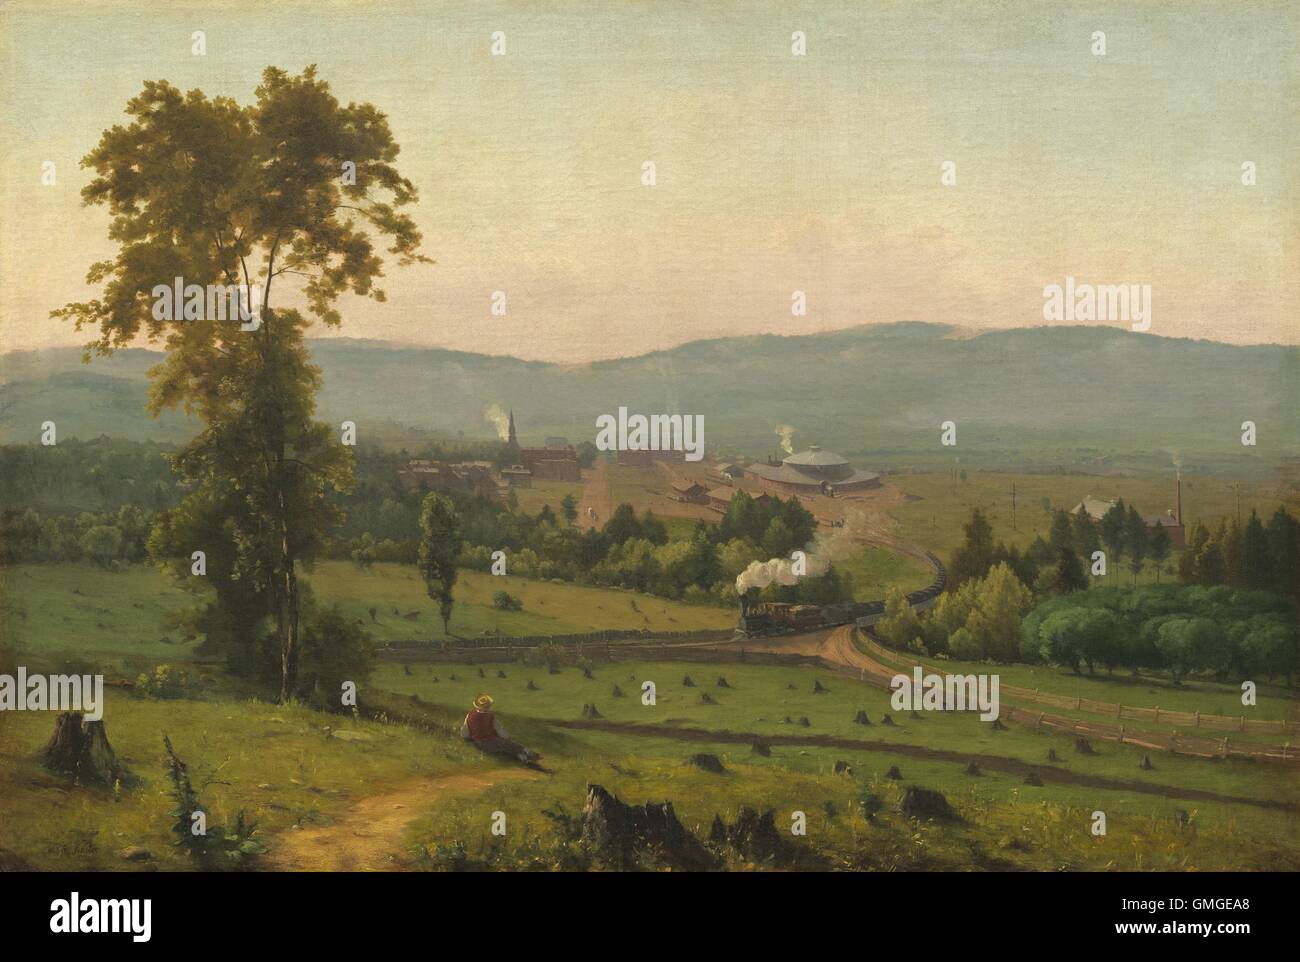 The Lackawanna Valley, by George Inness, 1856, American painting, oil on canvas. This painting was commissioned by the Delaware, Lackawanna, and Western Railroad. The roundhouse and city of Scranton are in the background (BSLOC 2016 5 86) Stock Photo